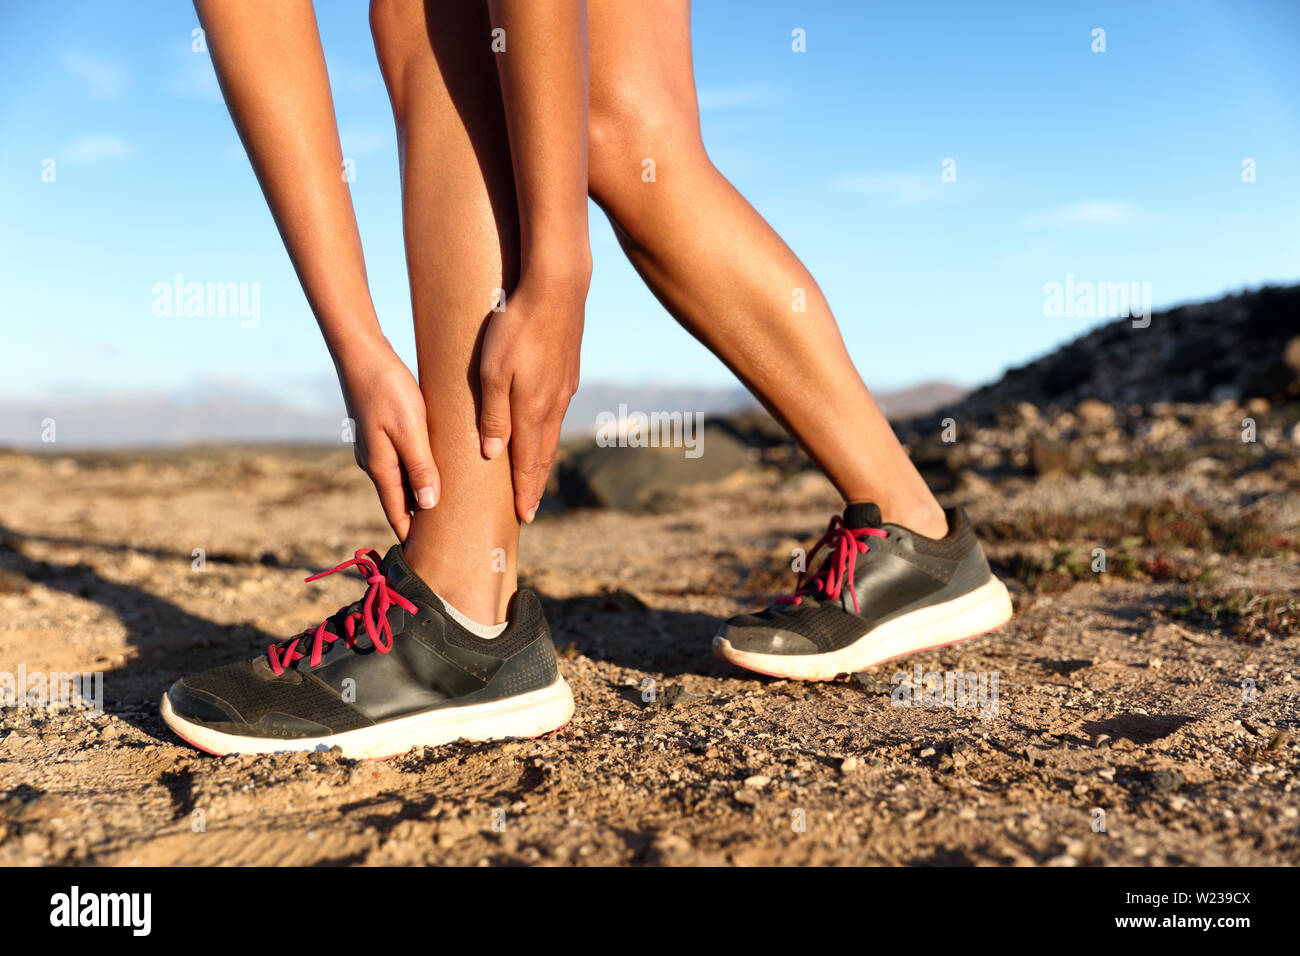 Runner woman with hurt ankles in pain during marathon. Athlete woman running outside with body injury. Sprained ankle on trail run in summer outdoors nature. Fitness leg accident on cardio workout. Stock Photo